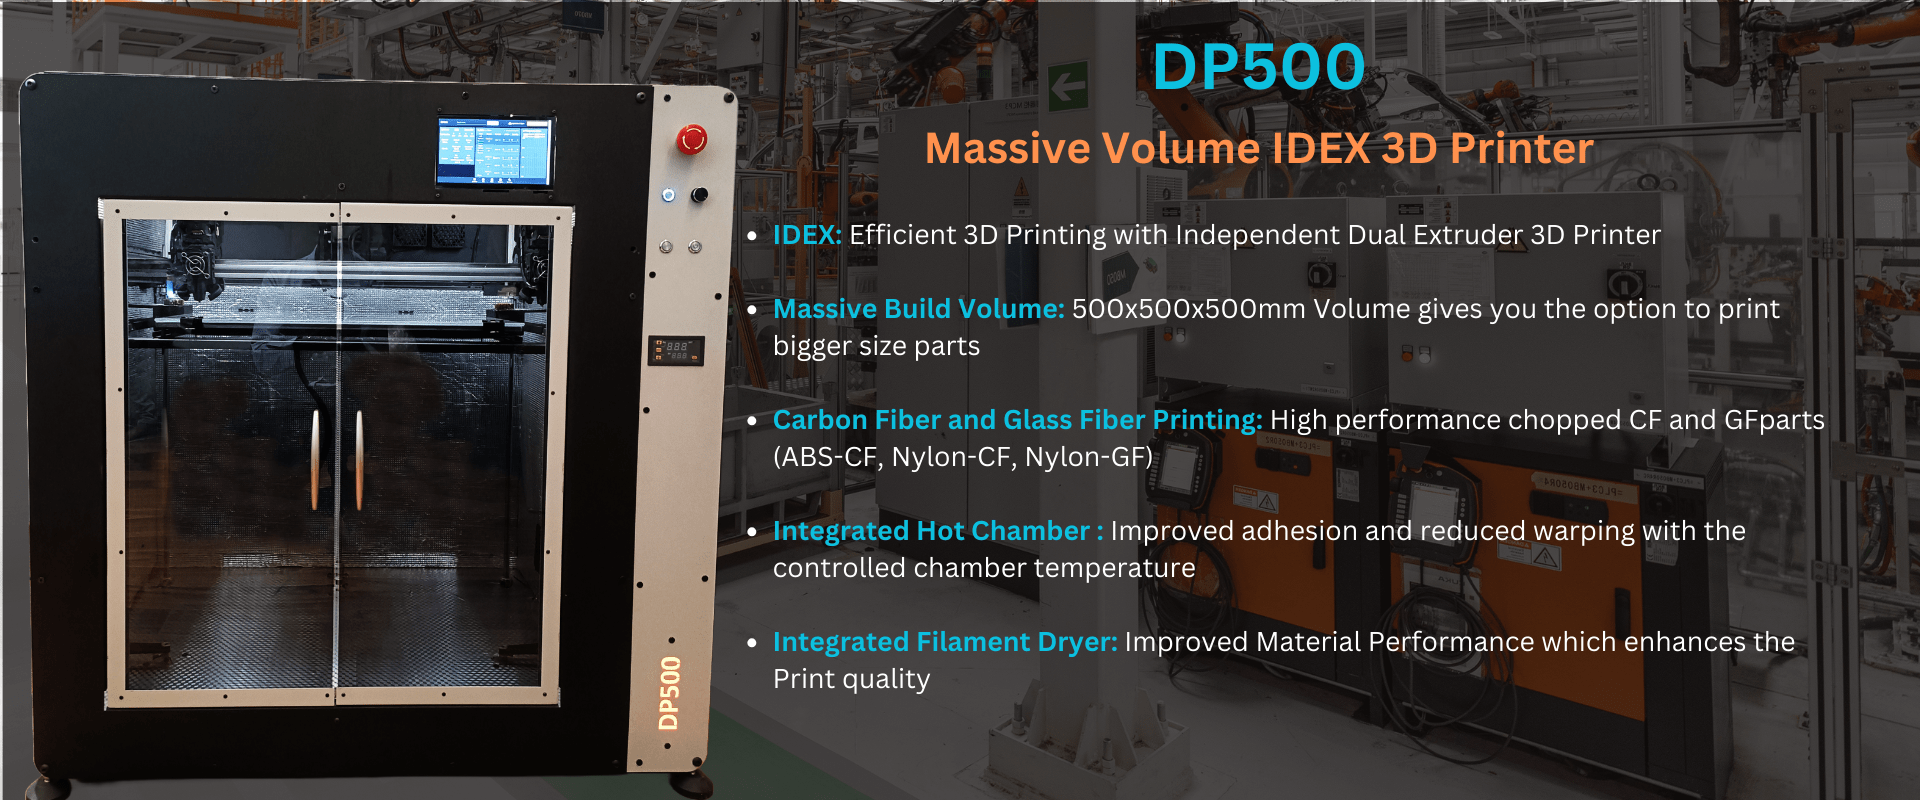 Main Features of IDEX 3d printer. This 3D Printer is equipped with Independent Dual Extrusion head